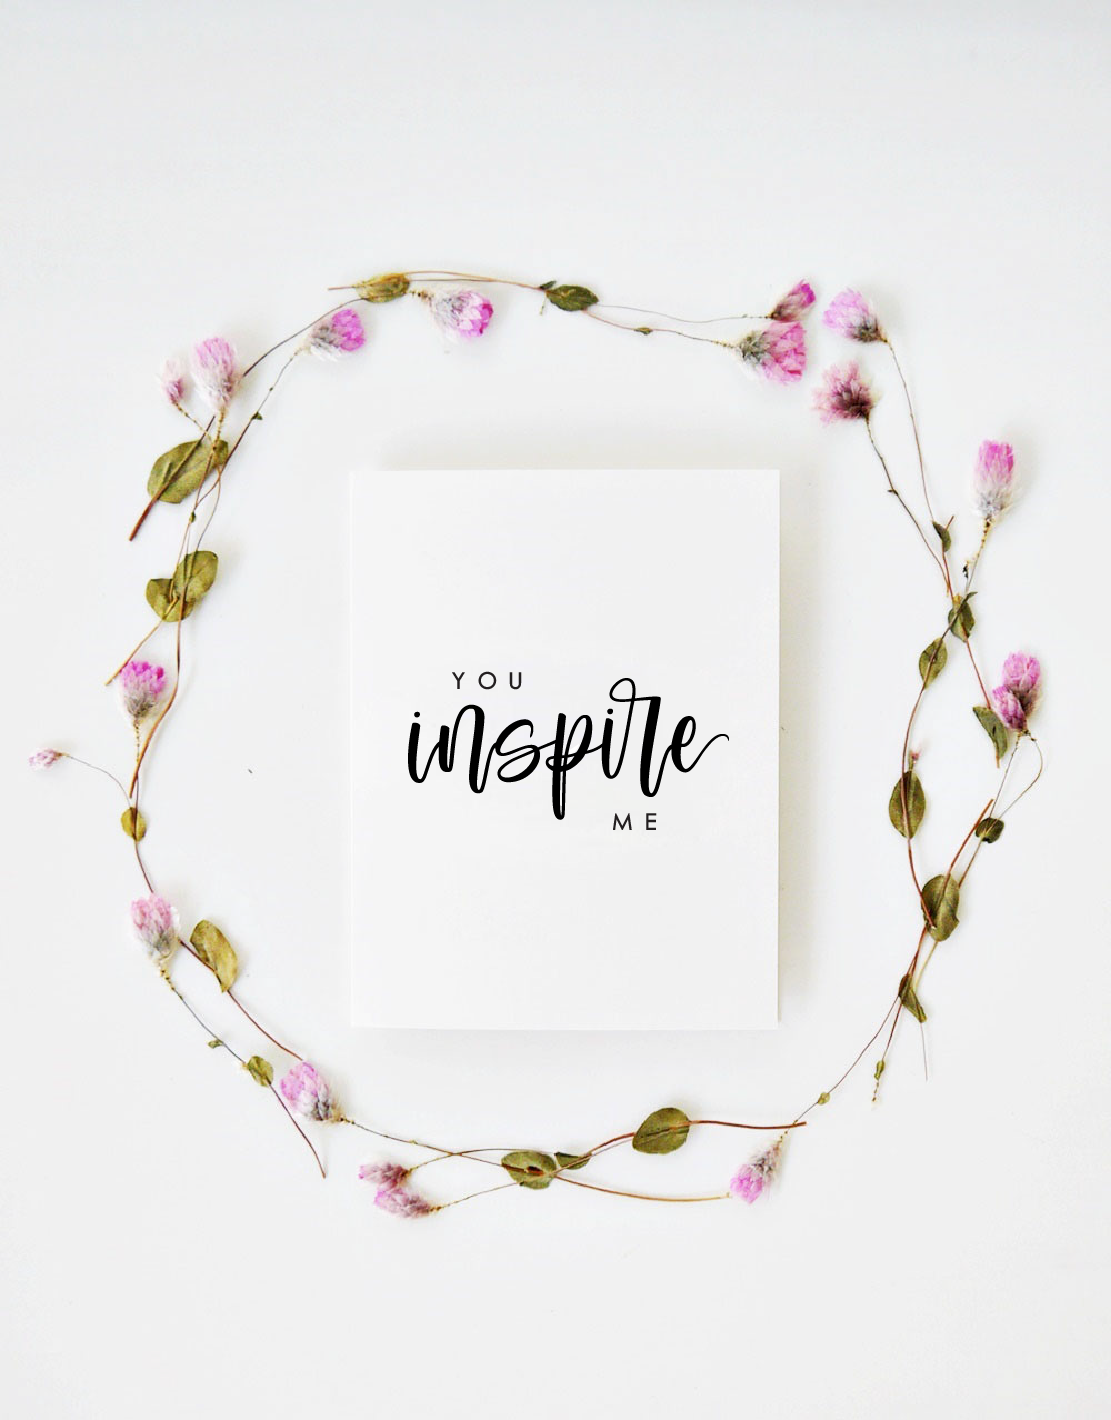 You Inspire Me Card